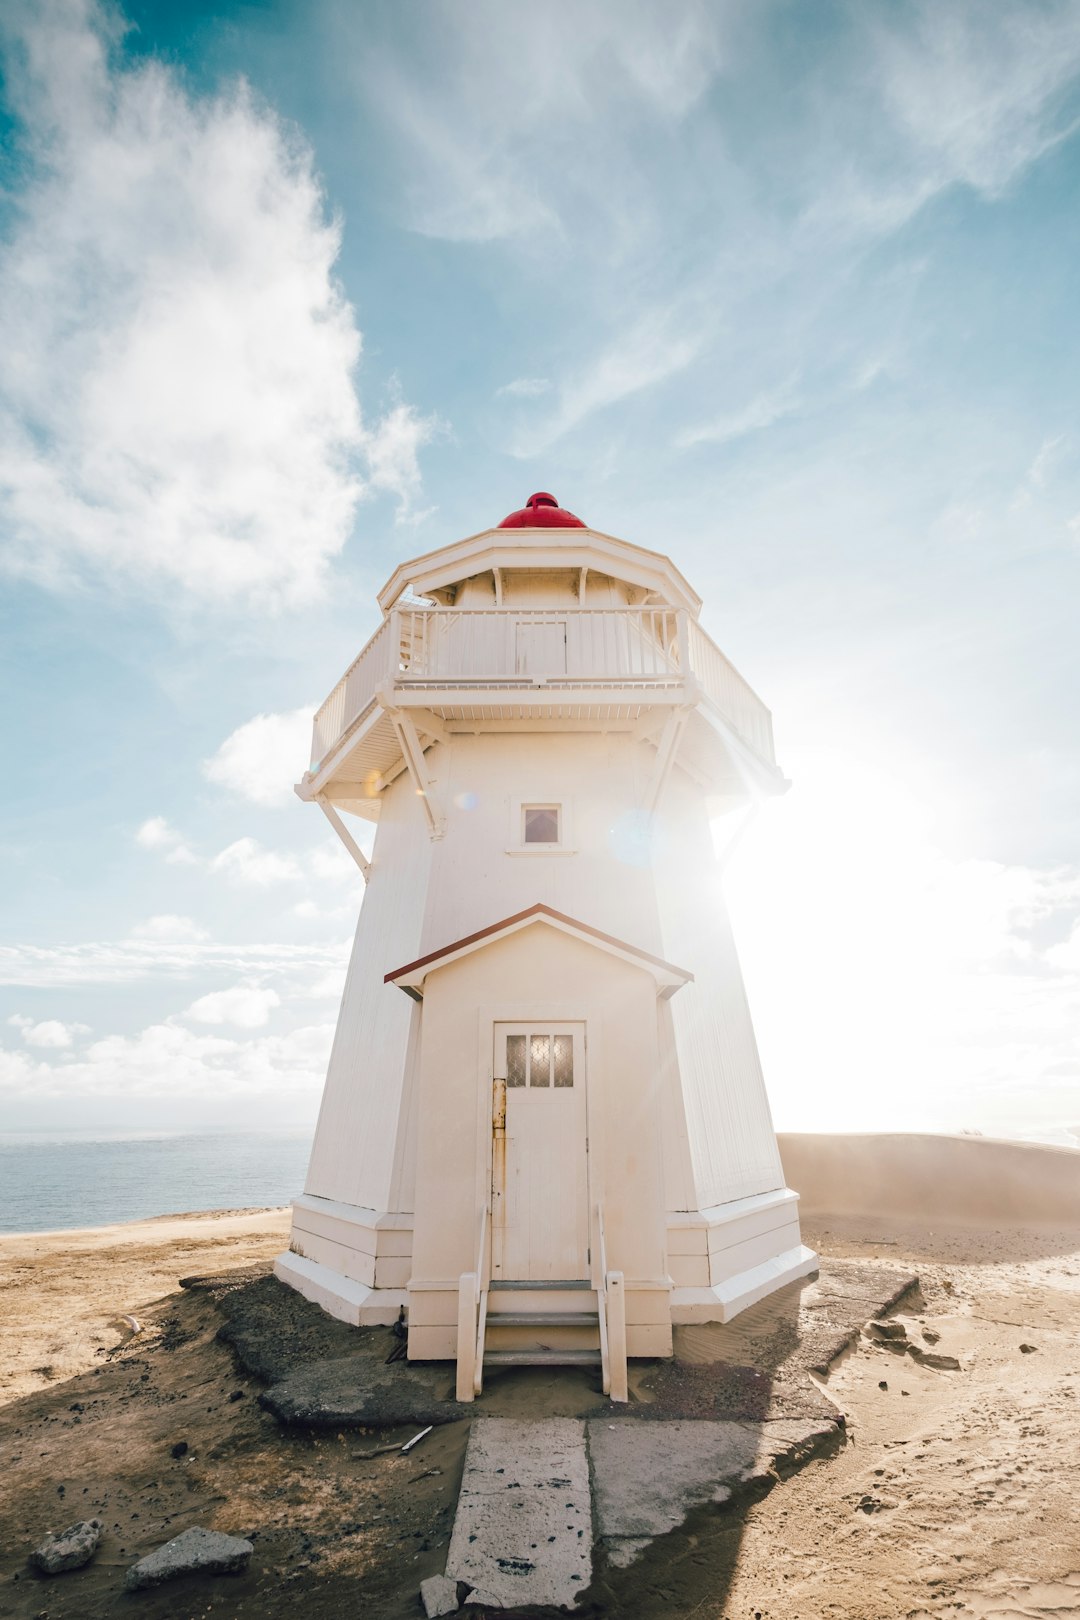 travelers stories about Lighthouse in Pouto Lighthouse, New Zealand